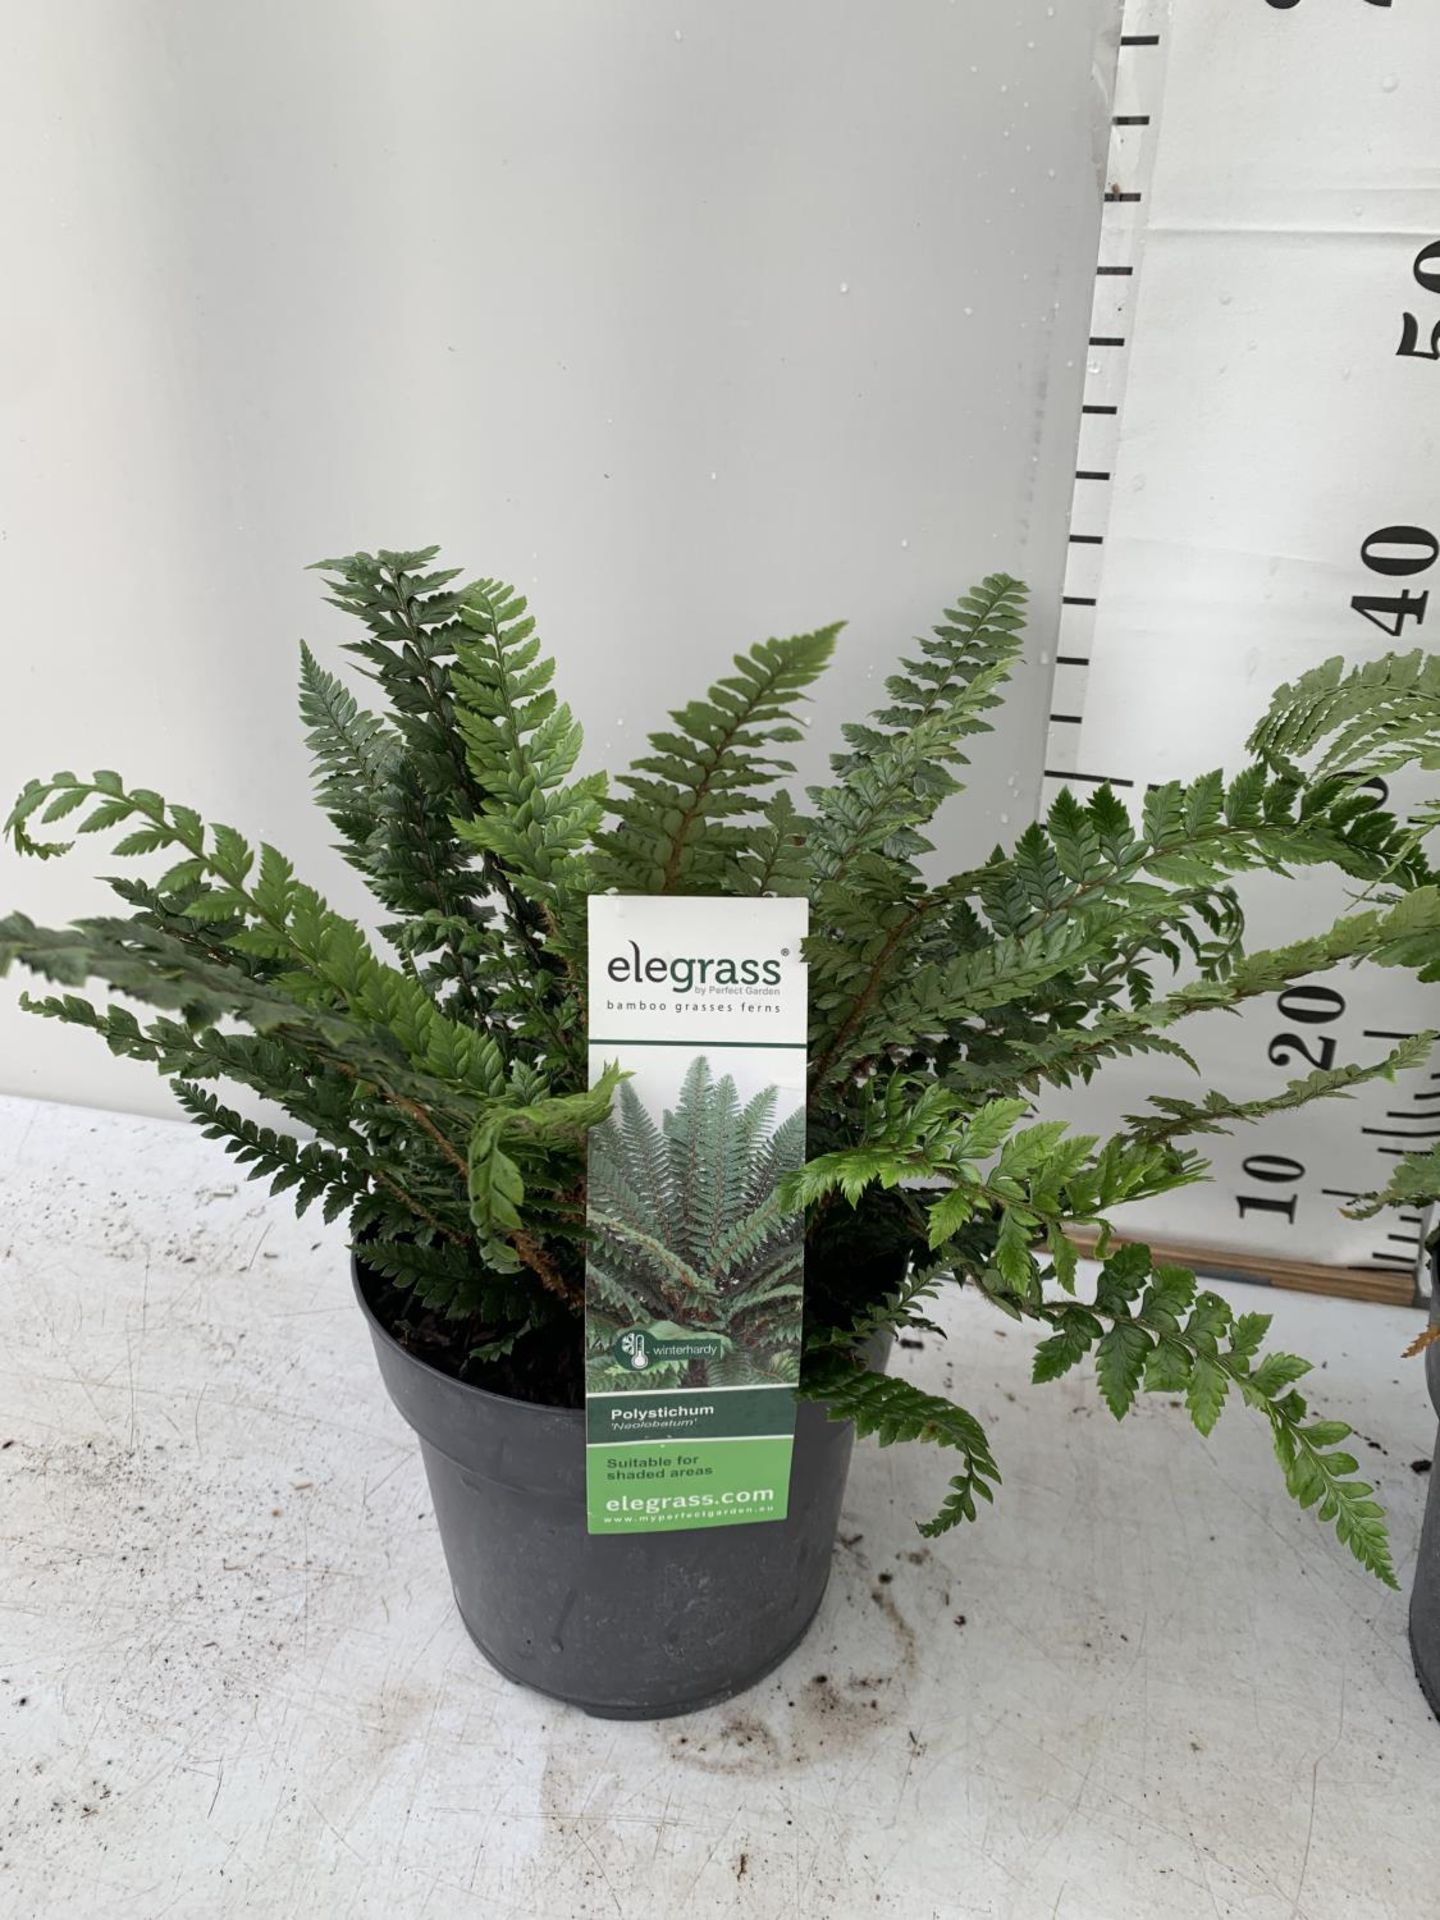 TWO LARGE ELEGRASS FERNS POLYSTICHUM AND DRYOPTERIS IN 3 LTR POTS 30-40CM TALL TO BE SOLD FOR THE - Image 3 of 9